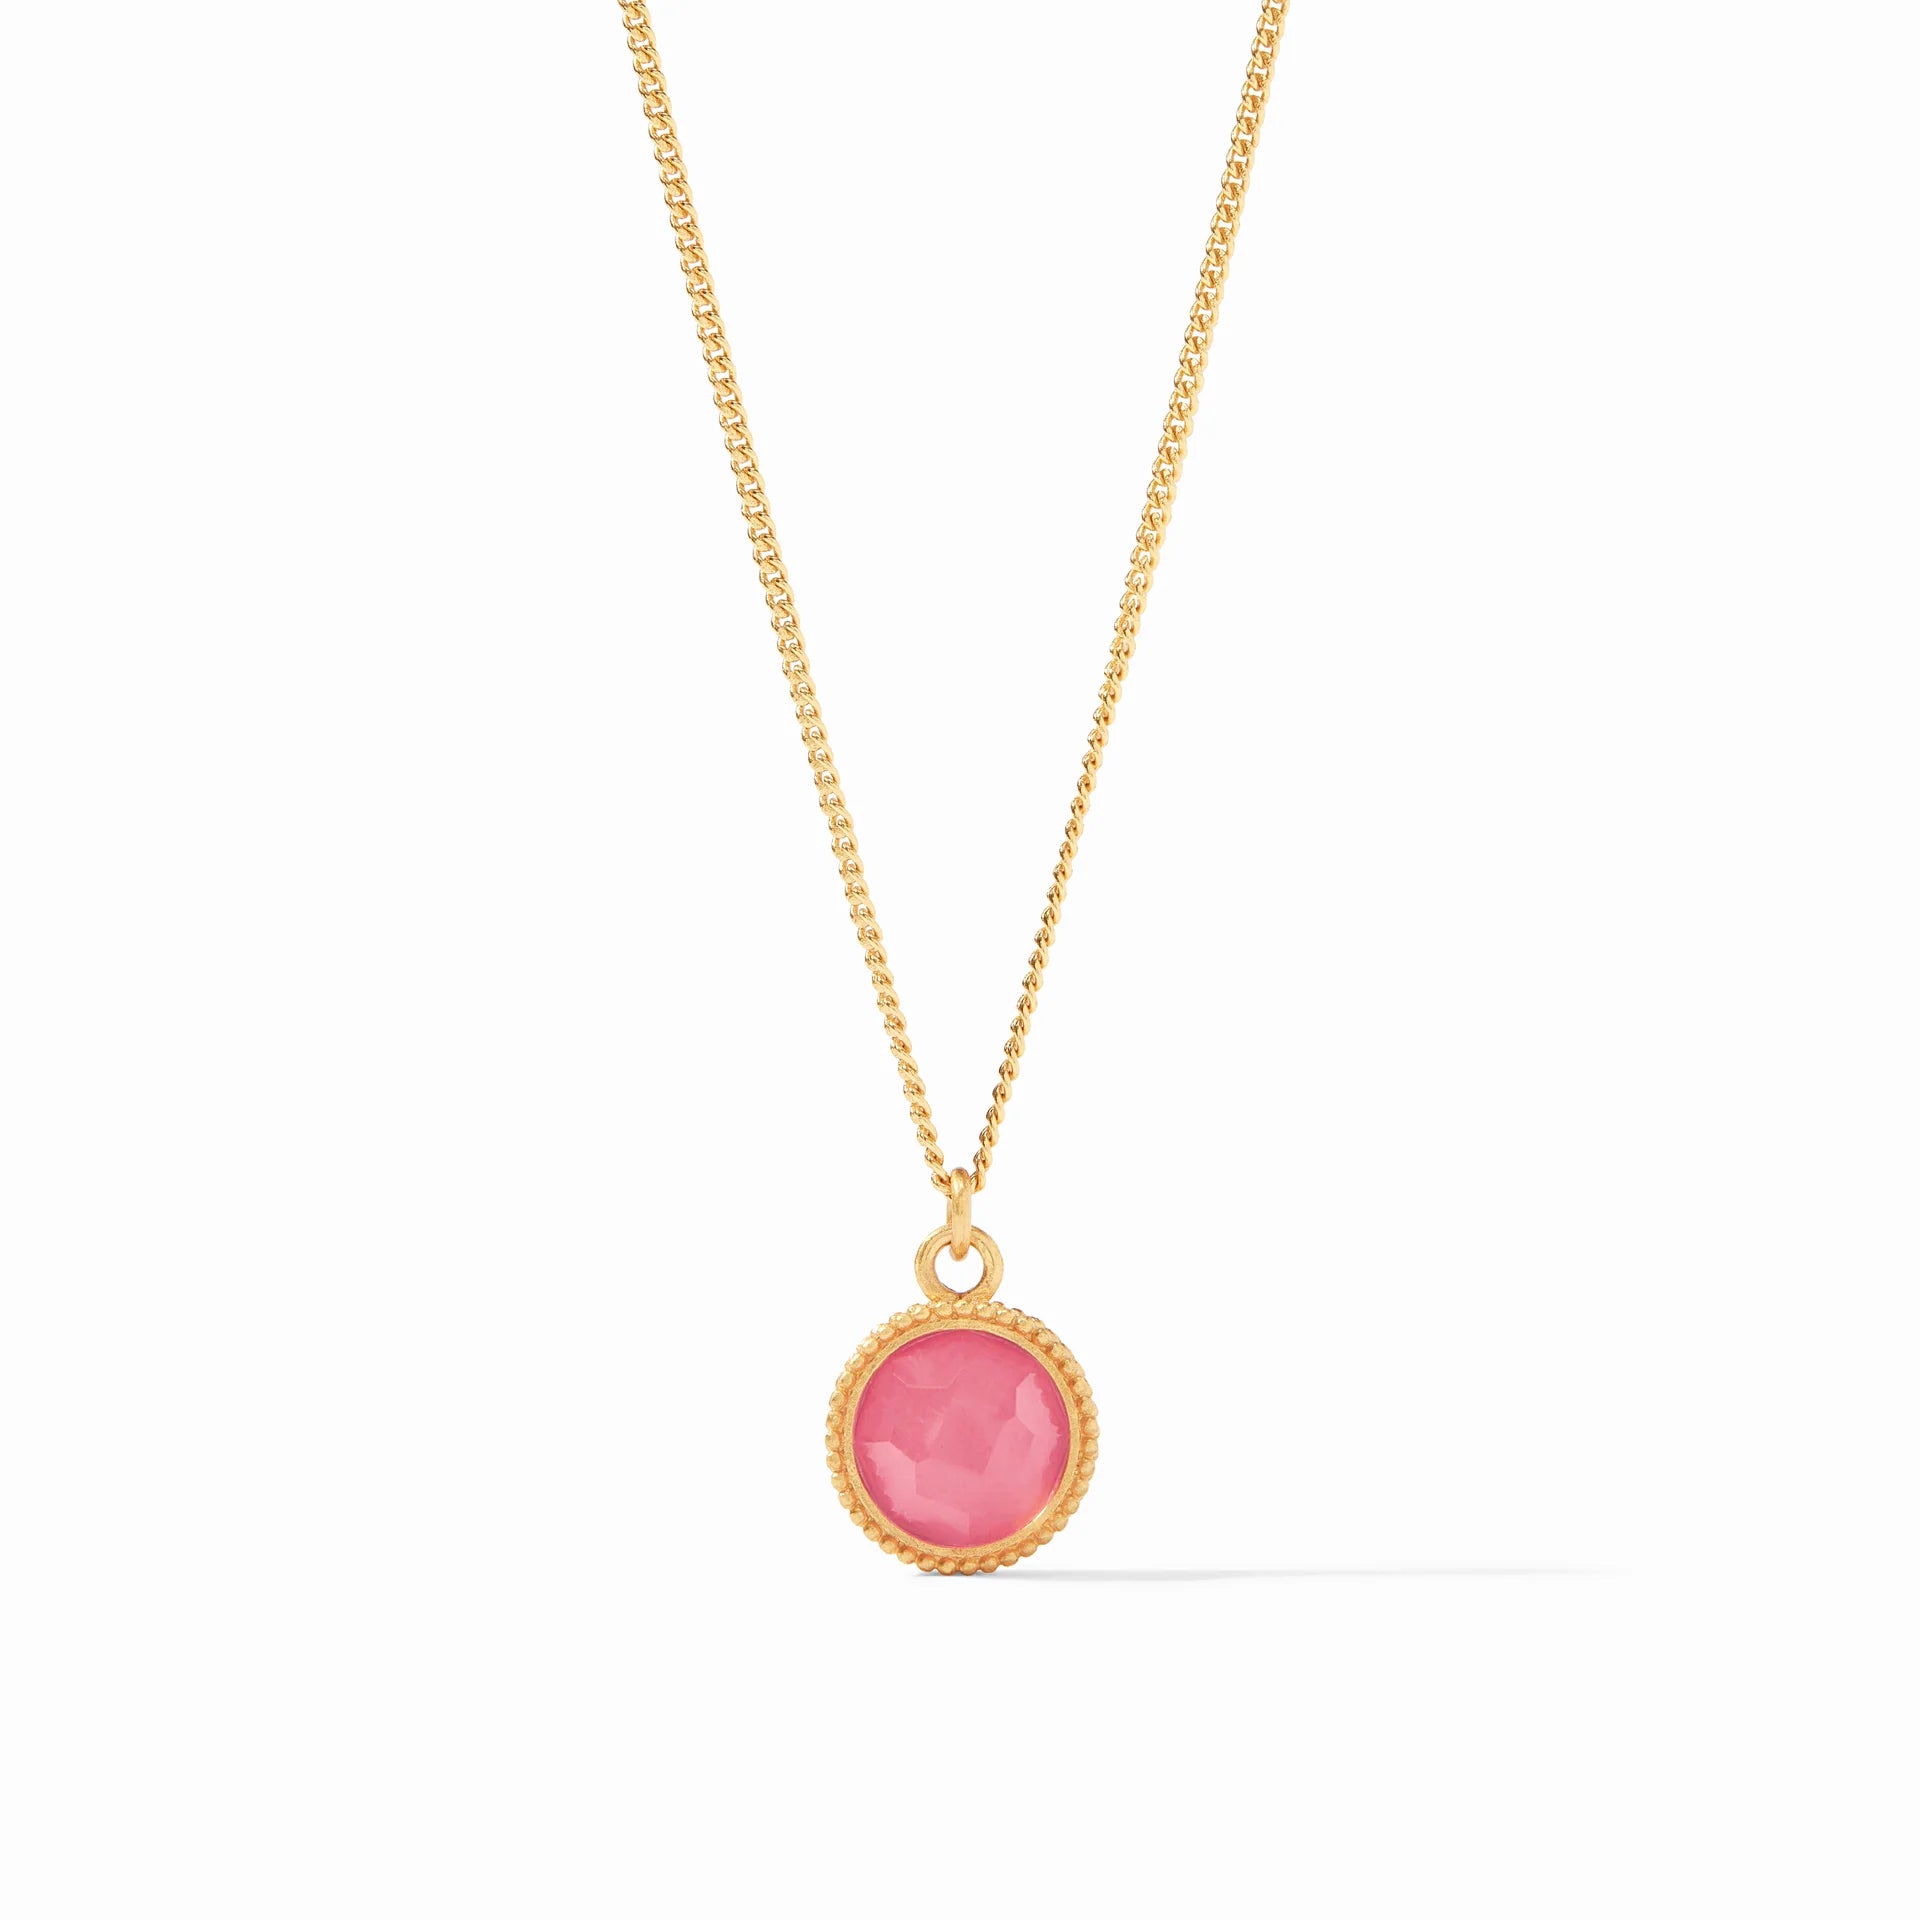 Fleur-de-Lis Solitaire Necklace / Iridescent Peony Pink by Julie Vos. One necklace, two ways to wear it—one side features a glittering gemstone, while the reverse side features a fleur-de-lis intaglio. 17-18 inch length, 24K gold plate. Shop at The Painted Cottage in Edgewater, MD.